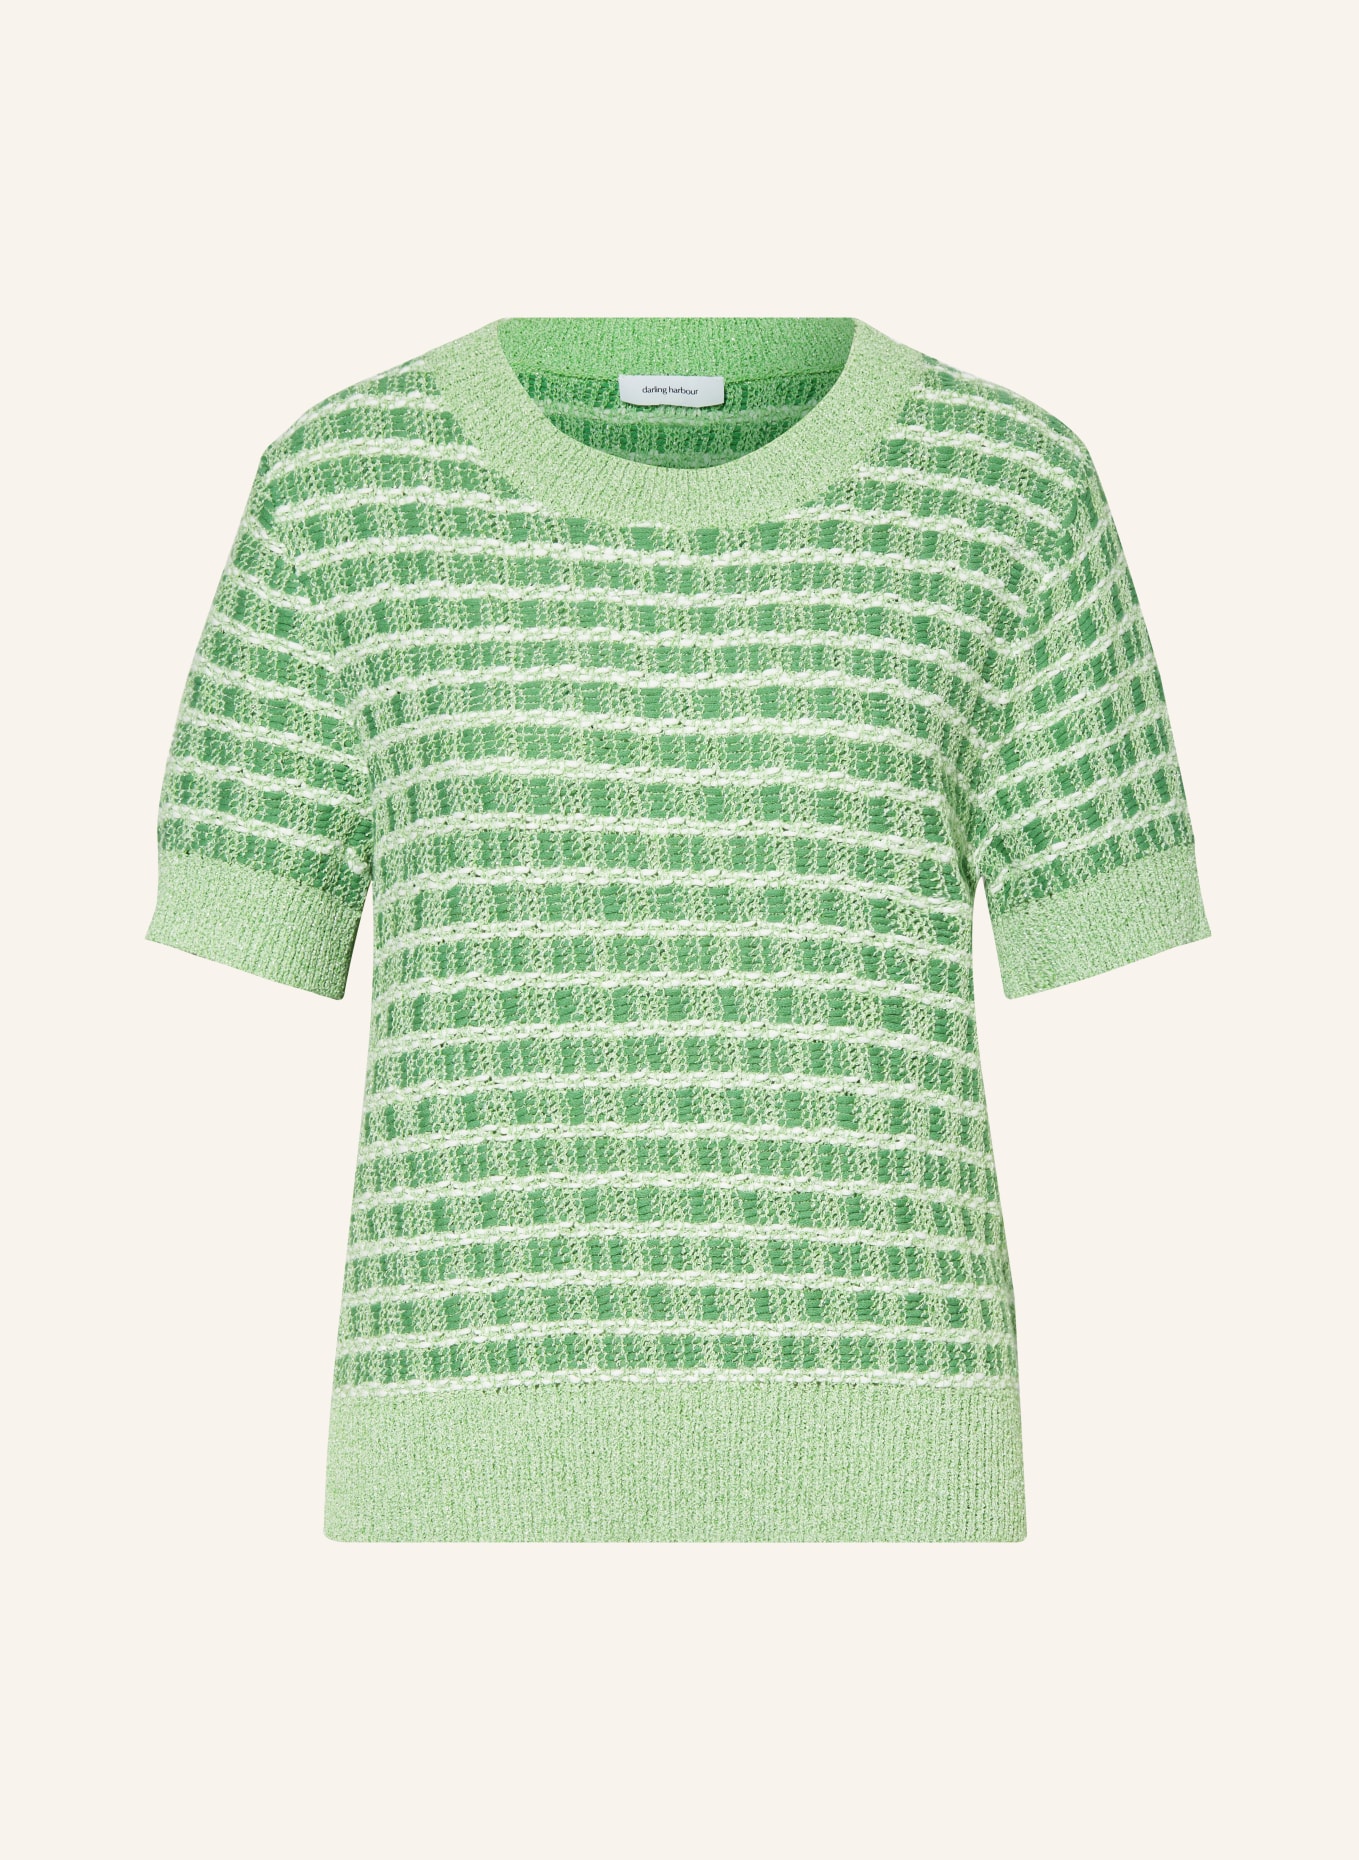 darling harbour Knit shirt with glitter thread, Color: LIGHT GREEN/ WHITE (Image 1)